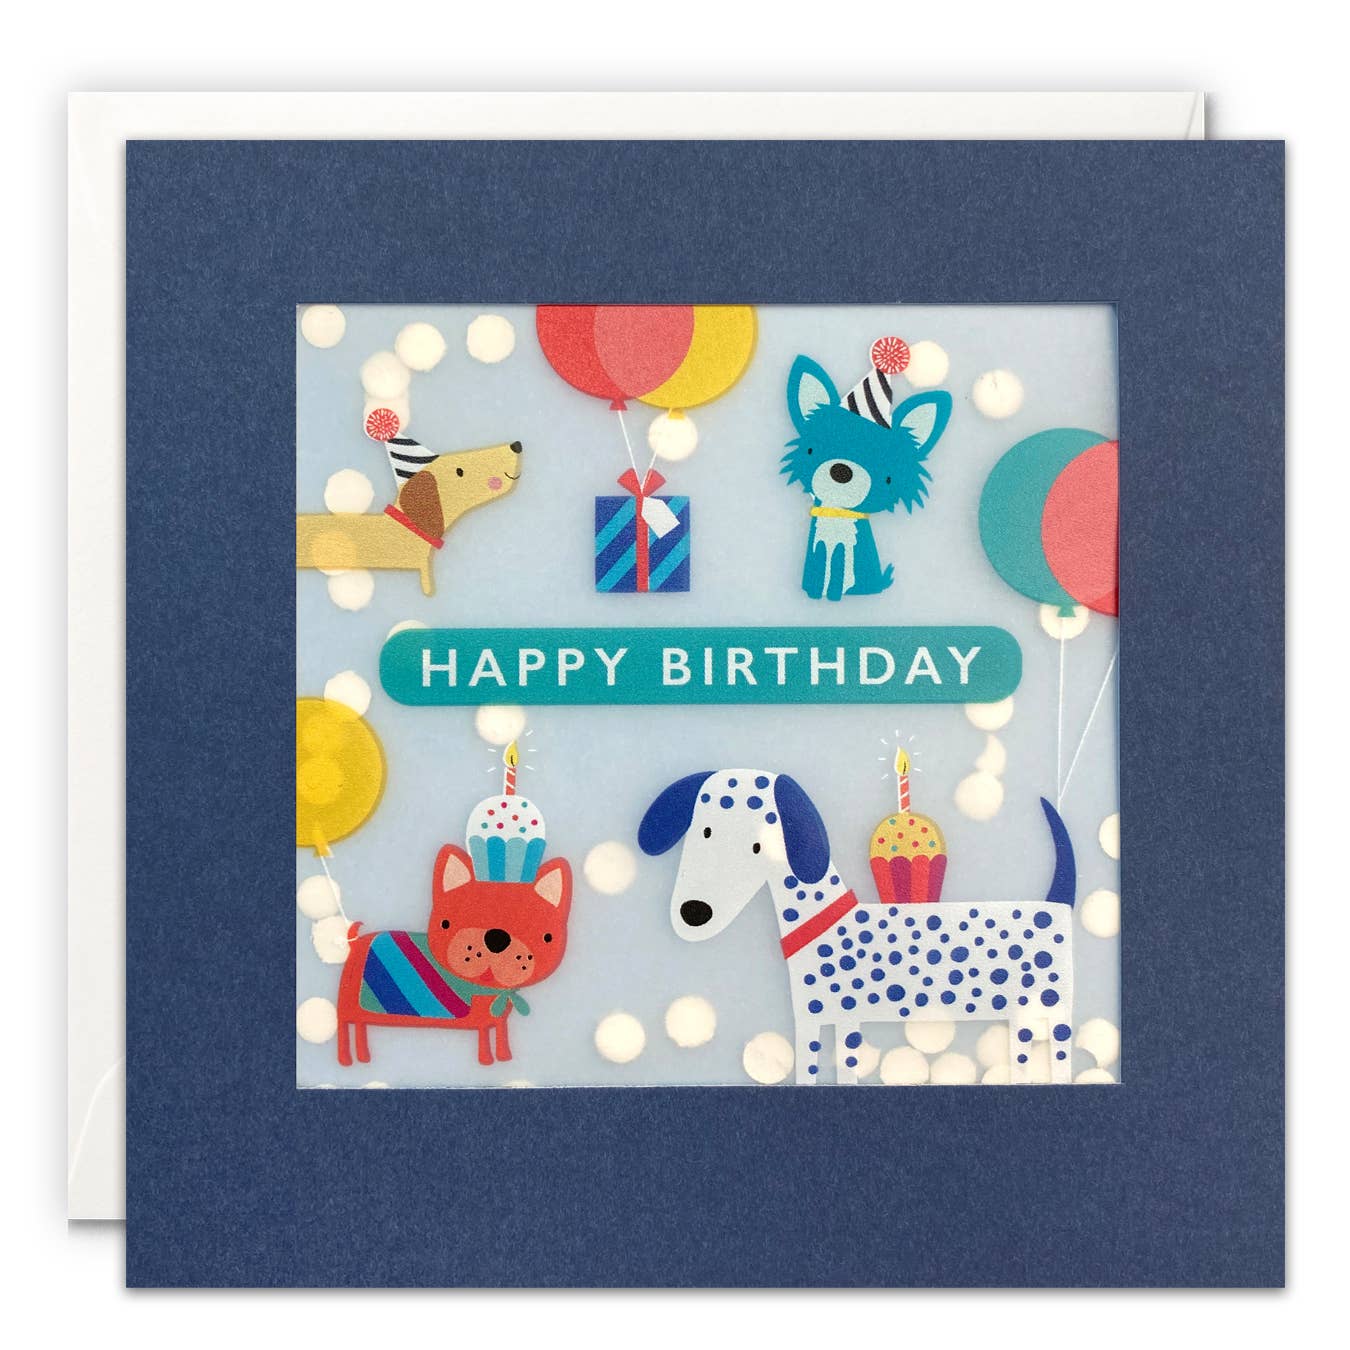 Dogs and Balloons Paper Shakies Card